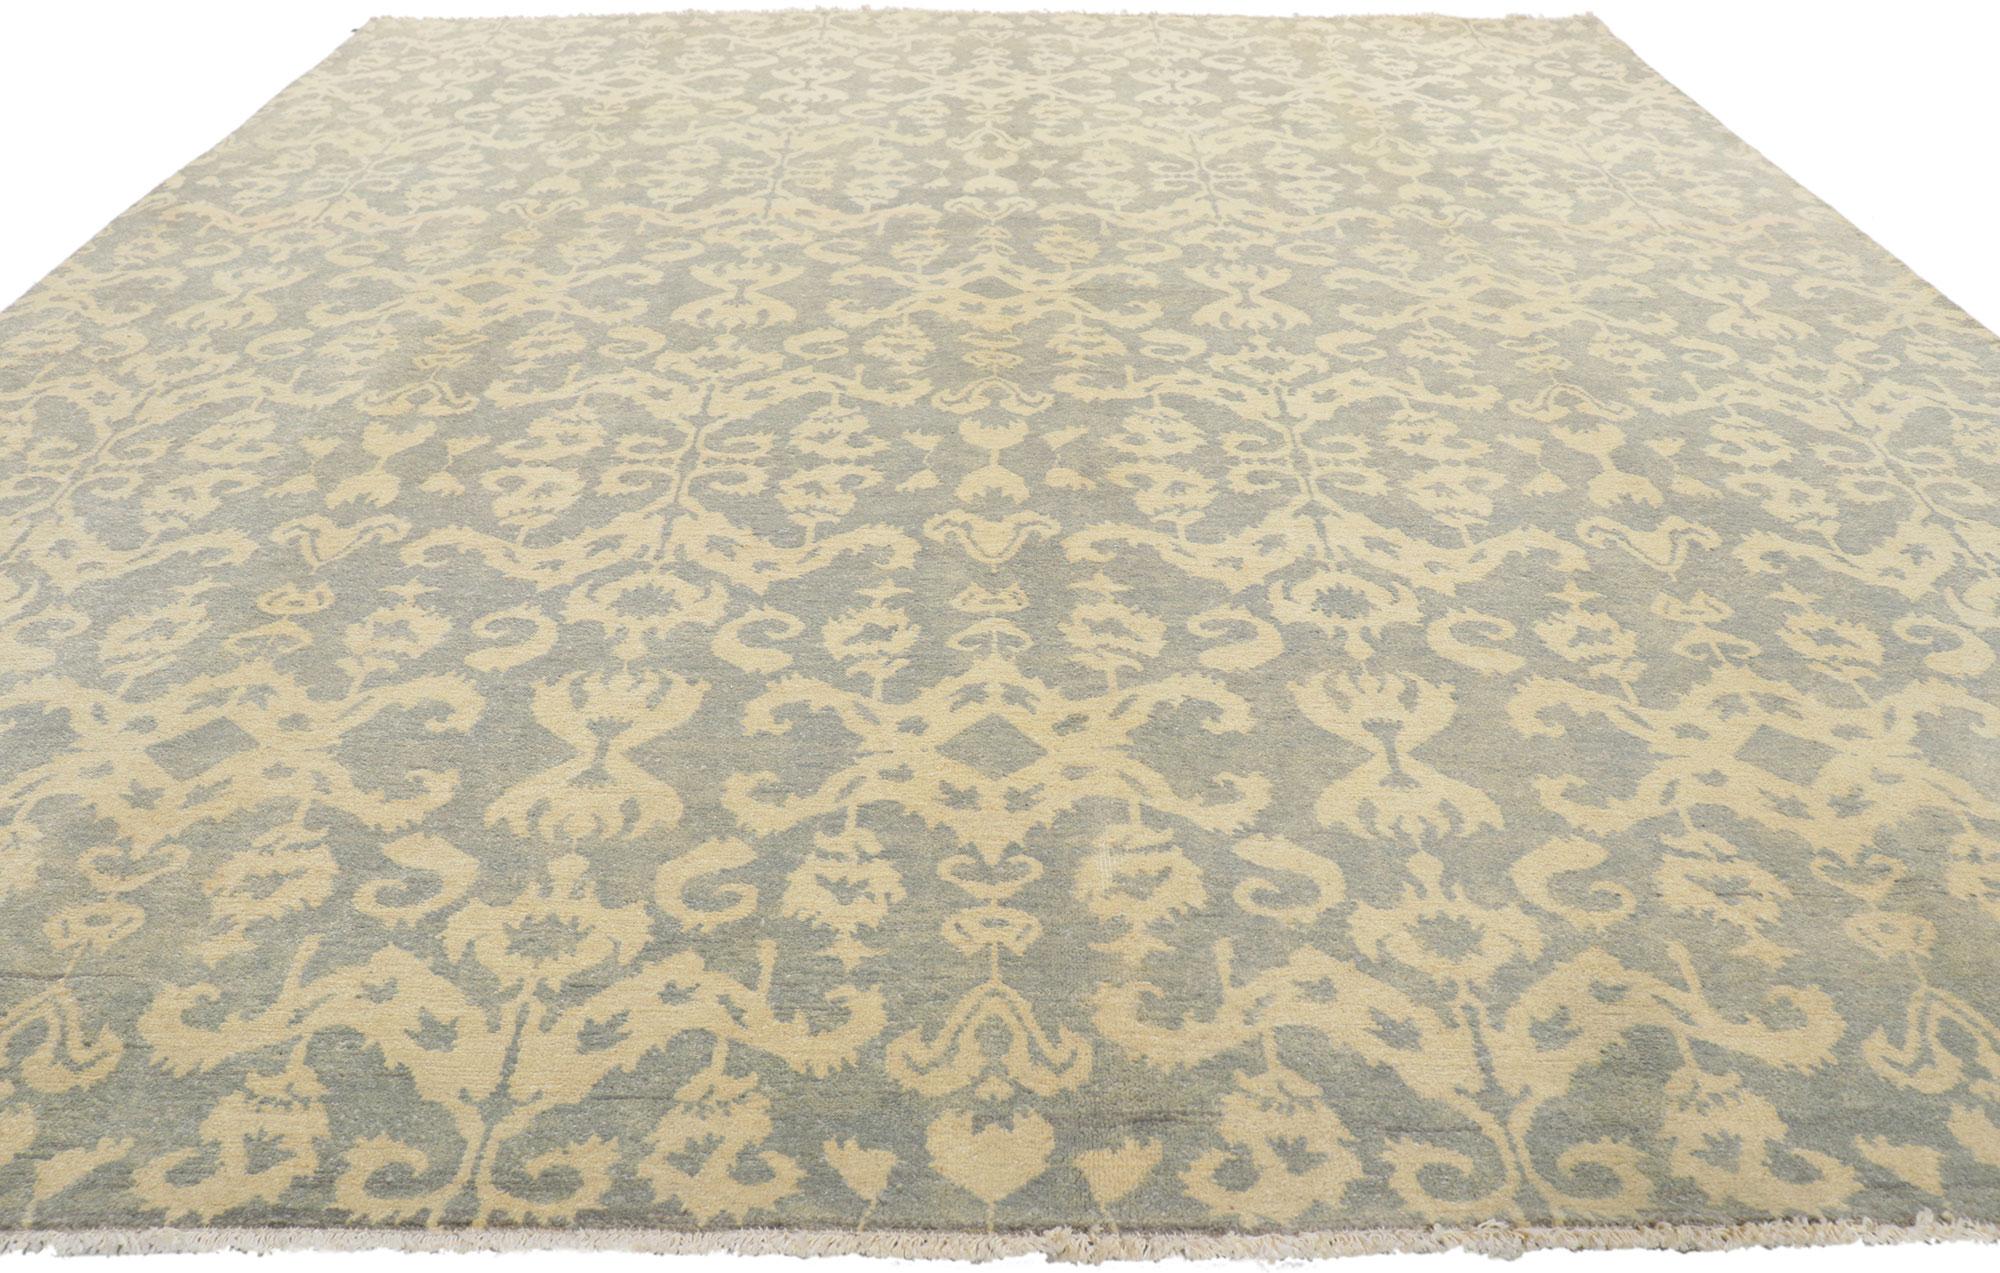 Modern New Transitional Ikat Area Rug with Soft Earth-Tone Colors For Sale